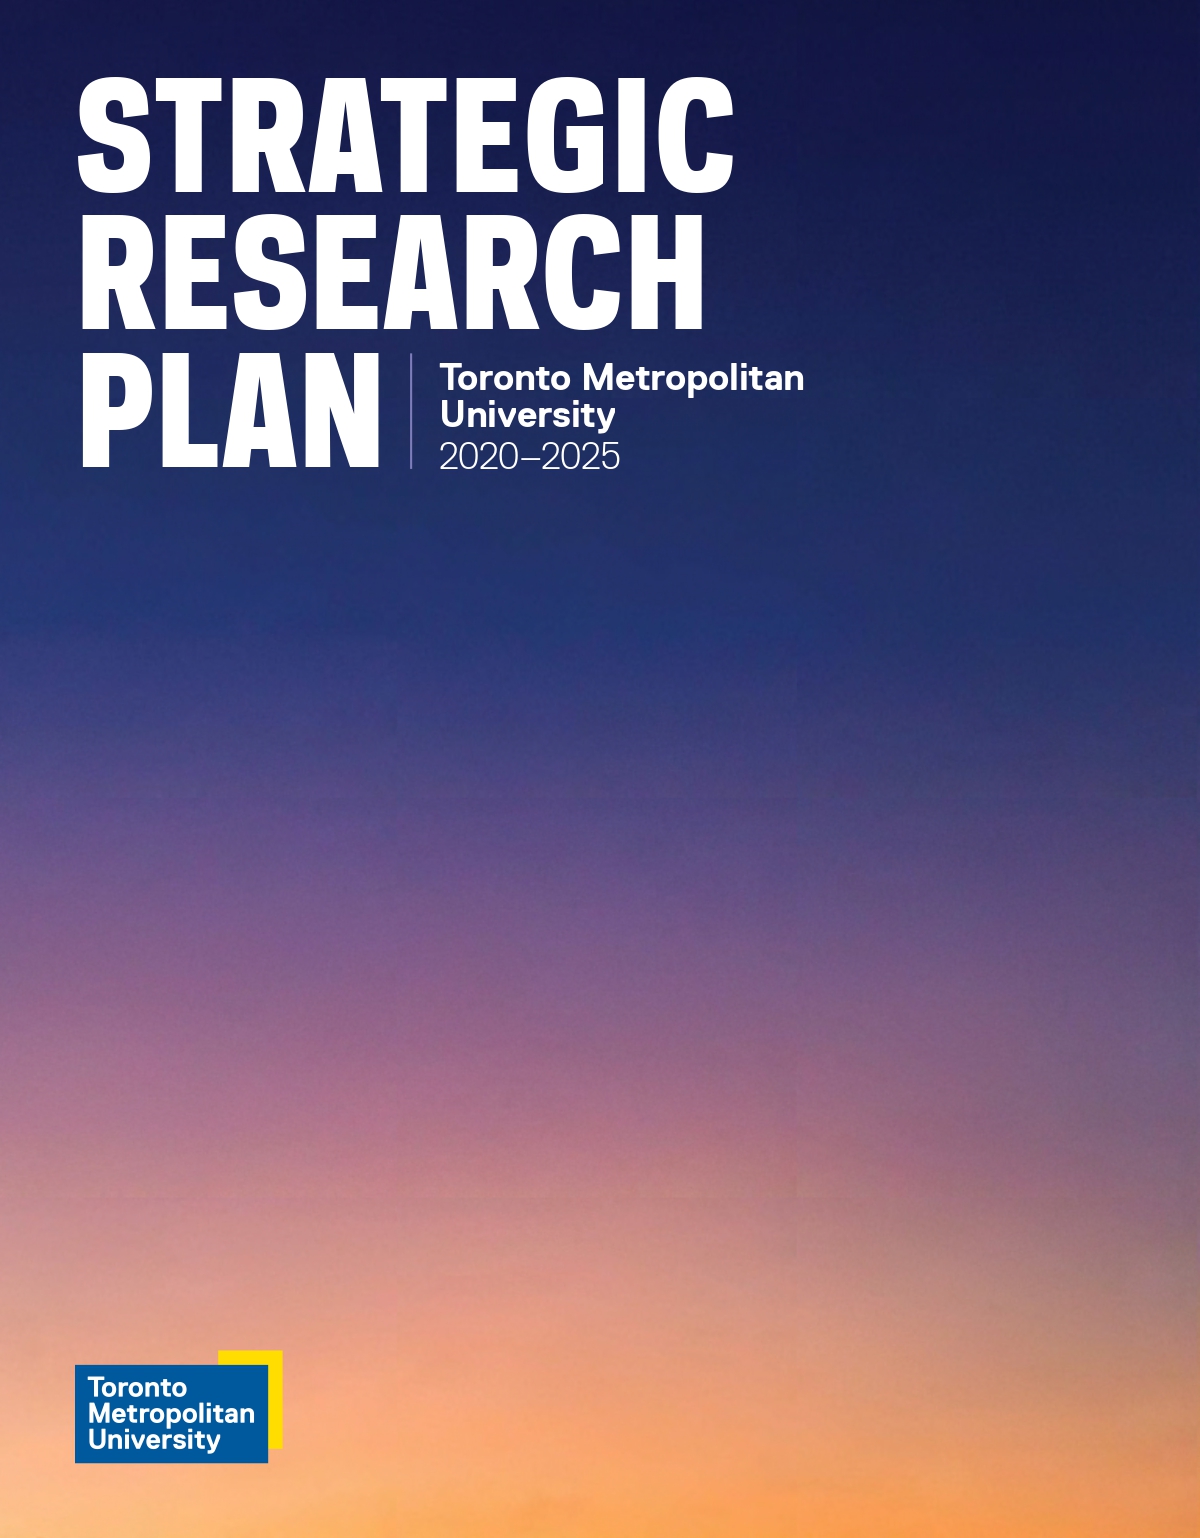 Cover of Strategic Research Plan document 2020-2025